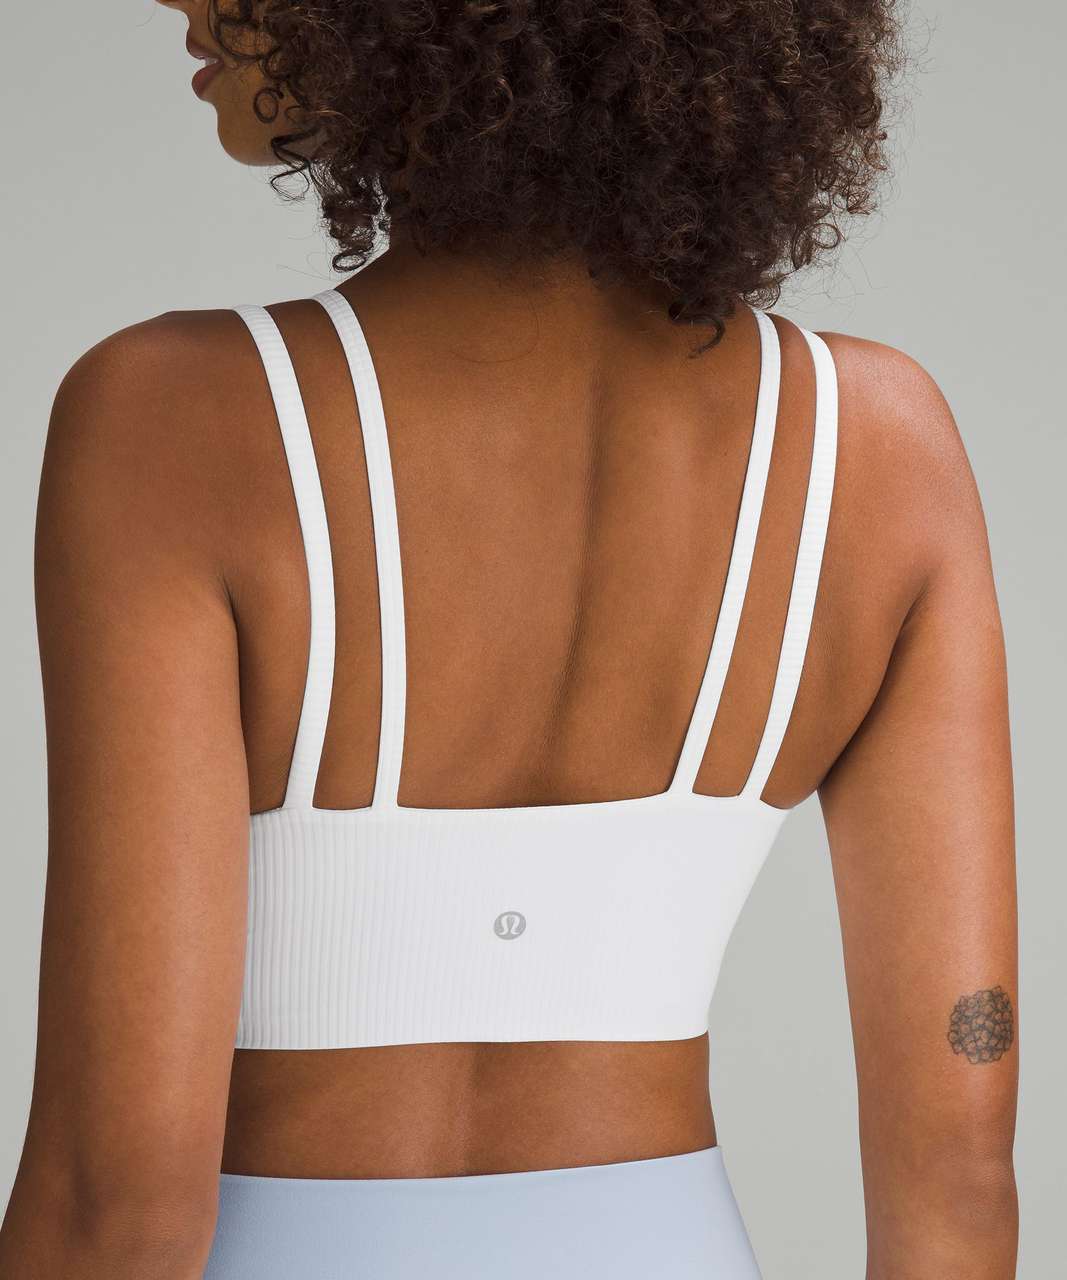 Lululemon Like a Cloud Strappy Longline Ribbed Bra *Light Support, B/C Cup - White